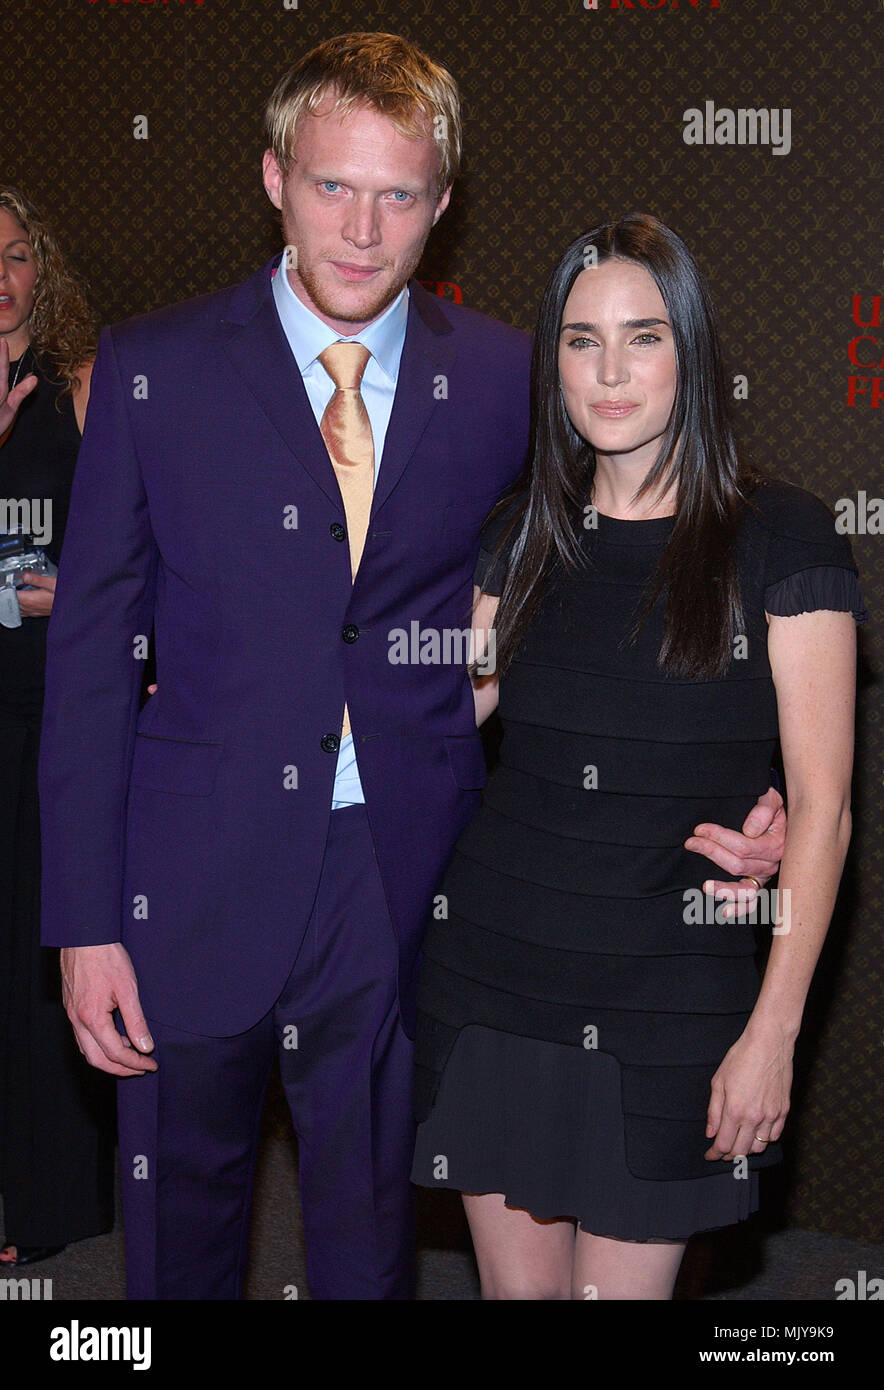 LOS ANGELES, CA. November 11, 2003: Actor PAUL BETTANY & wife actress JENNIFER  CONNELLY at the Los Angeles premiere of his new movie Master and Commander  Stock Photo - Alamy